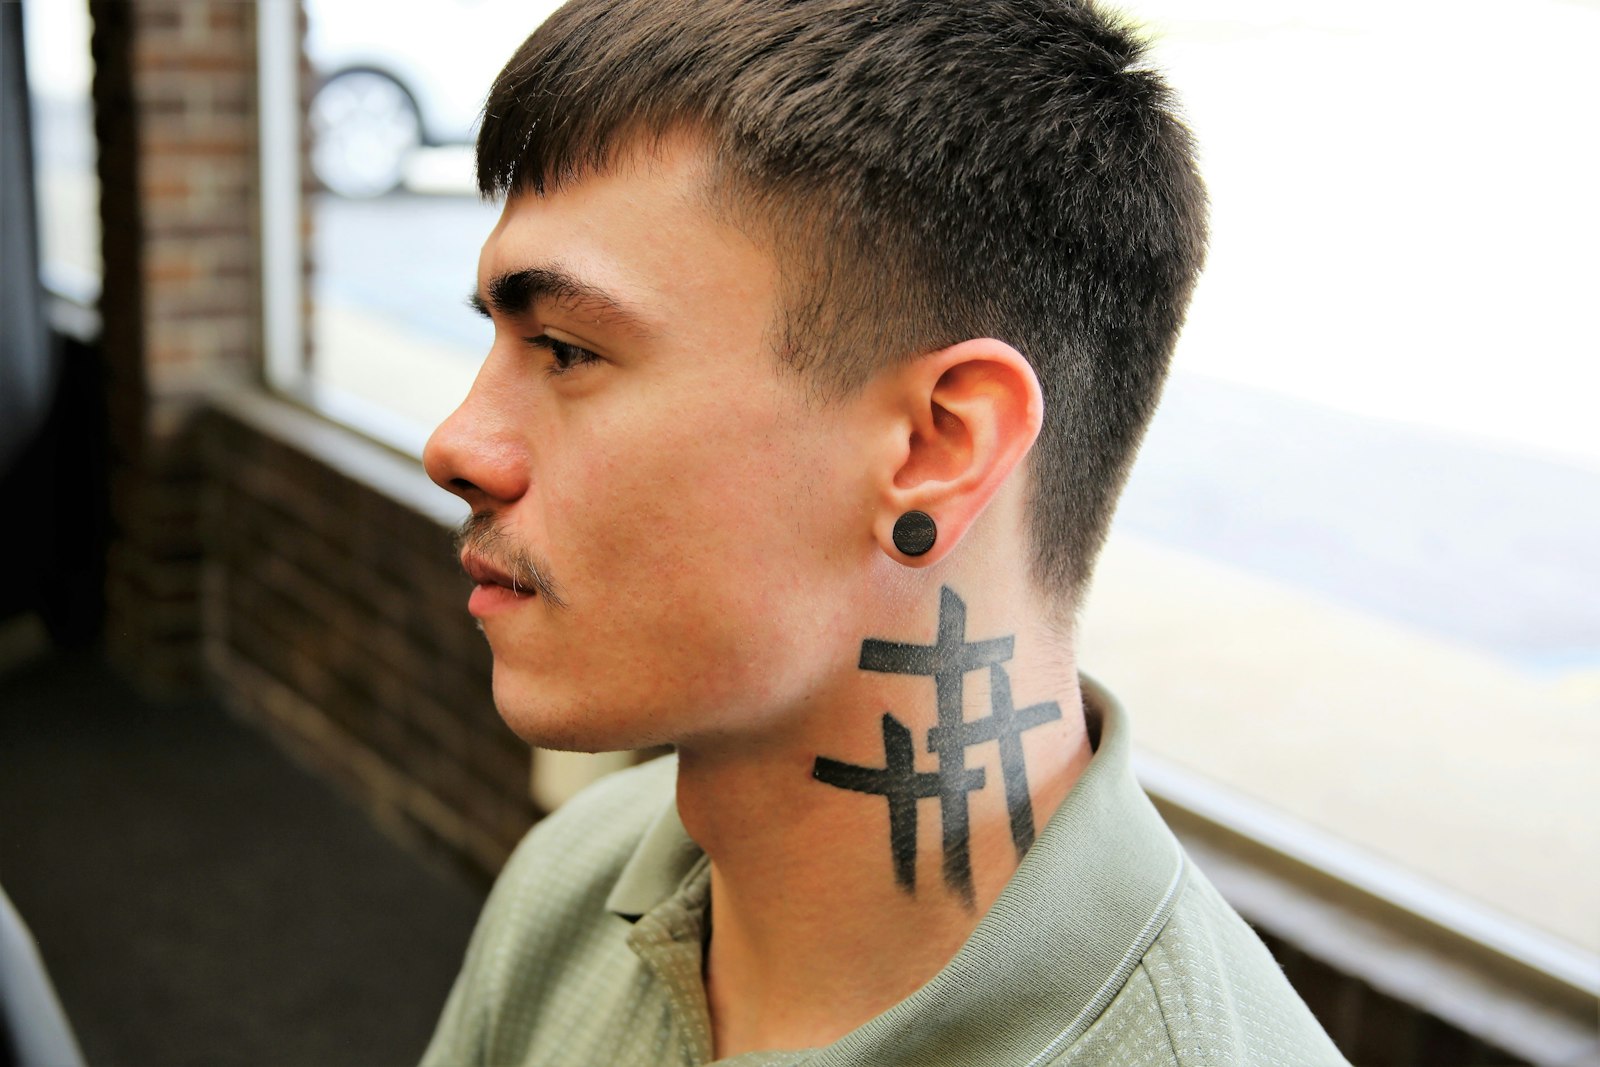 A tattoo on Trent's neck depicts three crosses representing the tragic deaths of three of Trent’s close friends. As he grows closer to Christ in his newfound Catholic faith, the tattoos covering Trent's body have taken on multiple meanings to him.